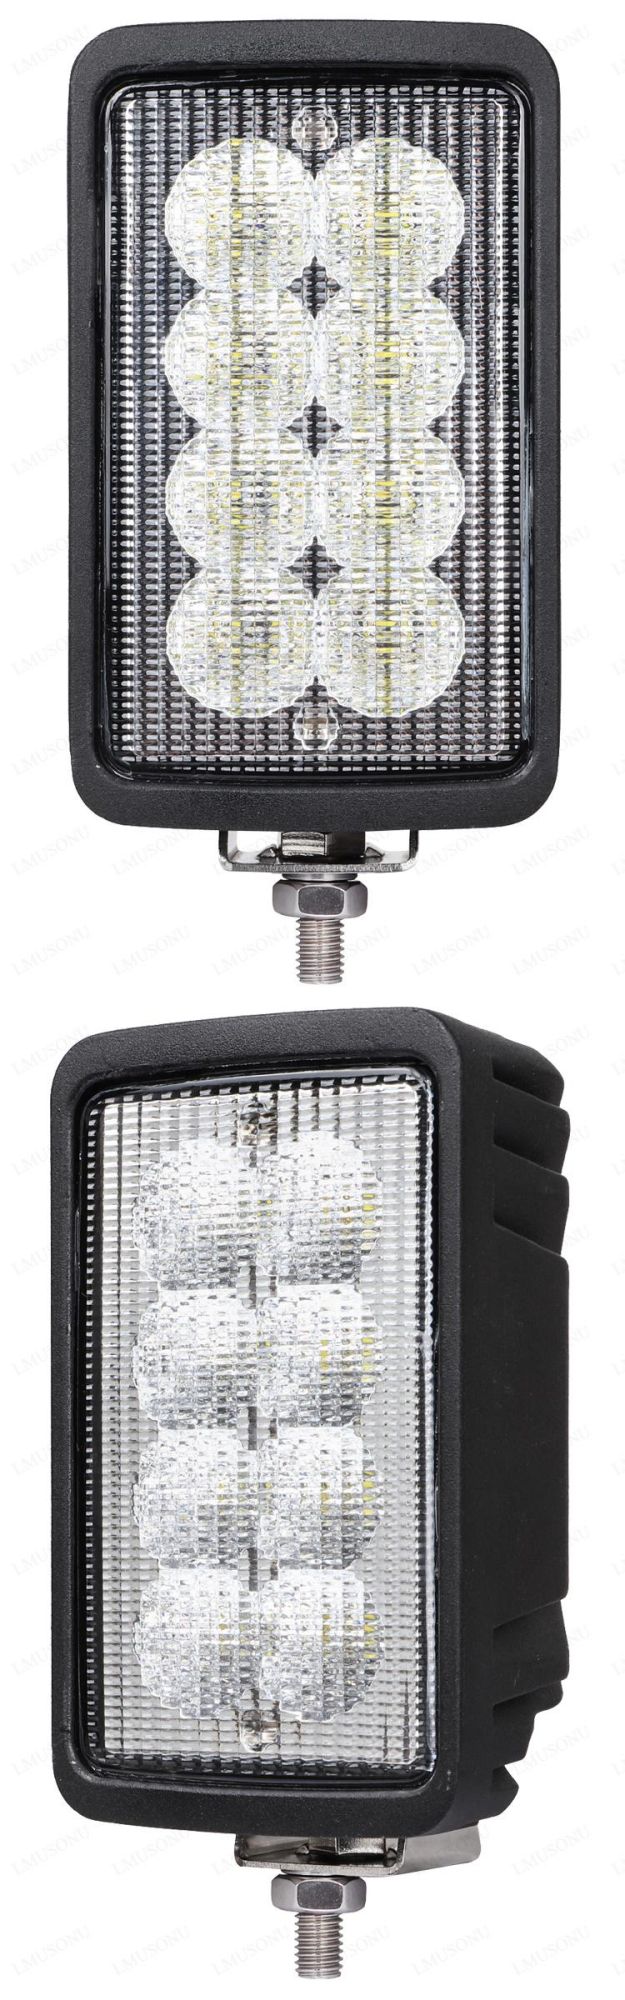 6.0 Inch 40W Truck 4X4 off Road LED Work Lamps EMC for Engineering Agriculture Communications Harvesters Construction Machinery Tractor SUV